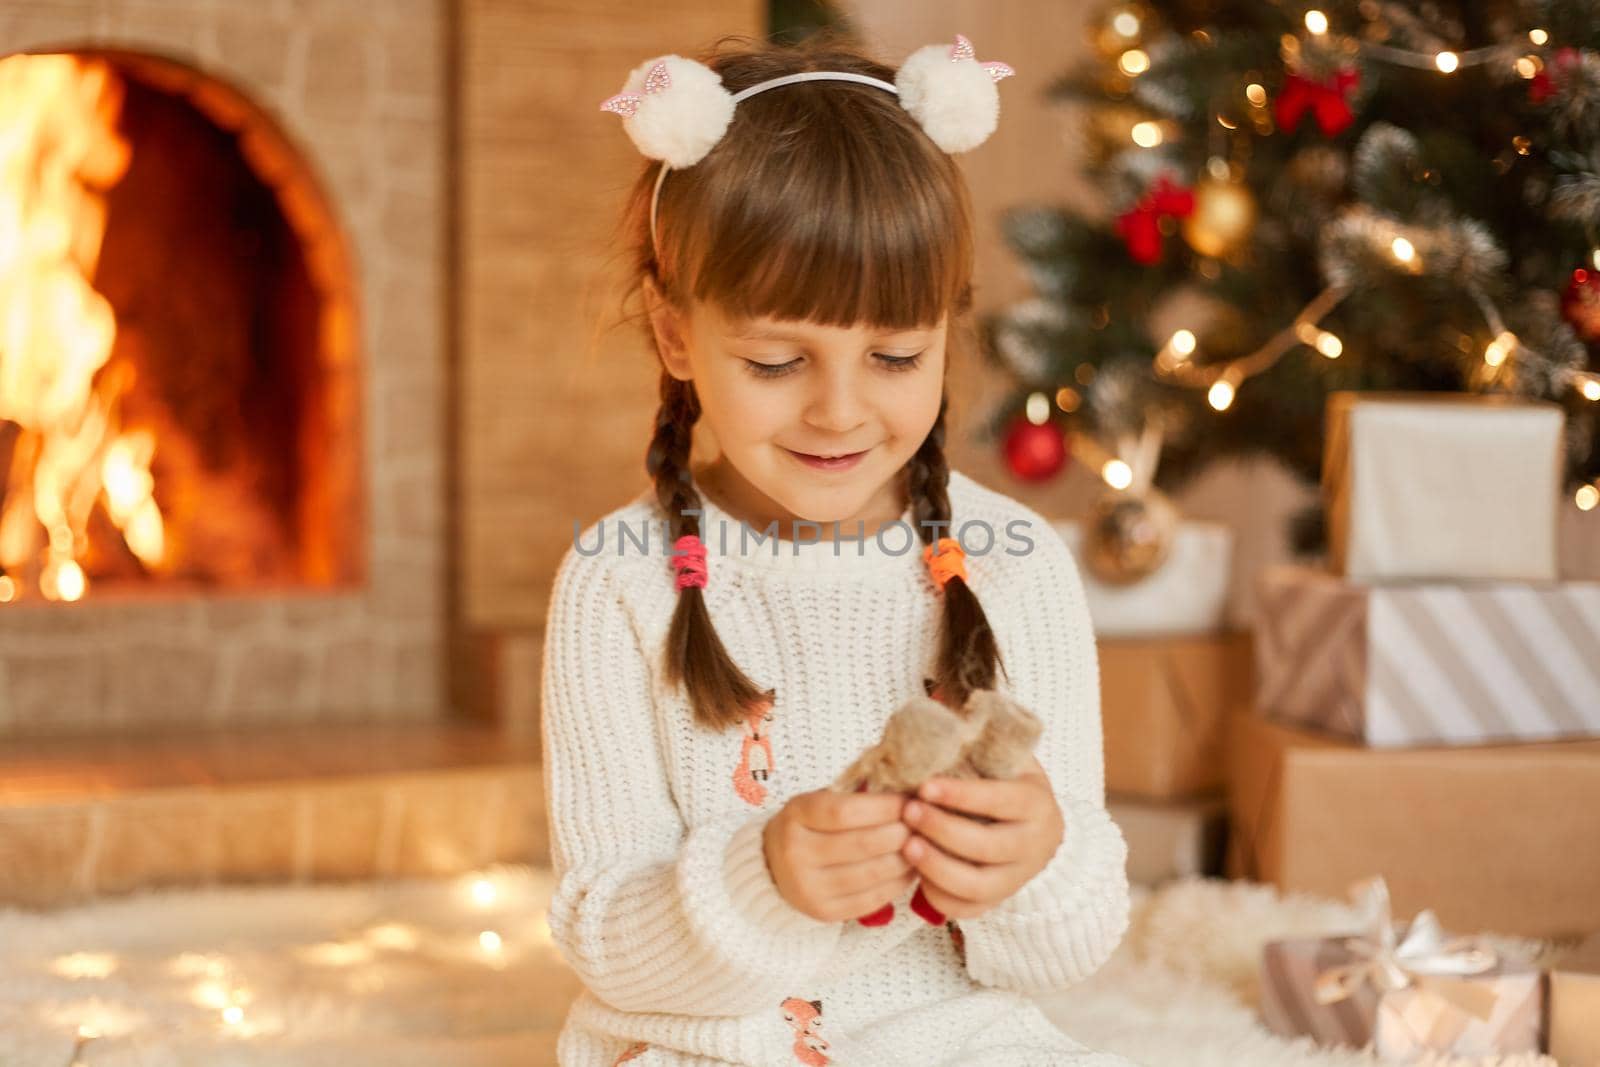 Charming kid girl playing with toy indoors, sitting on floor in room with Christmas decorations, celebration New Year, female child looking at her toy with smile, wearing white sweater.